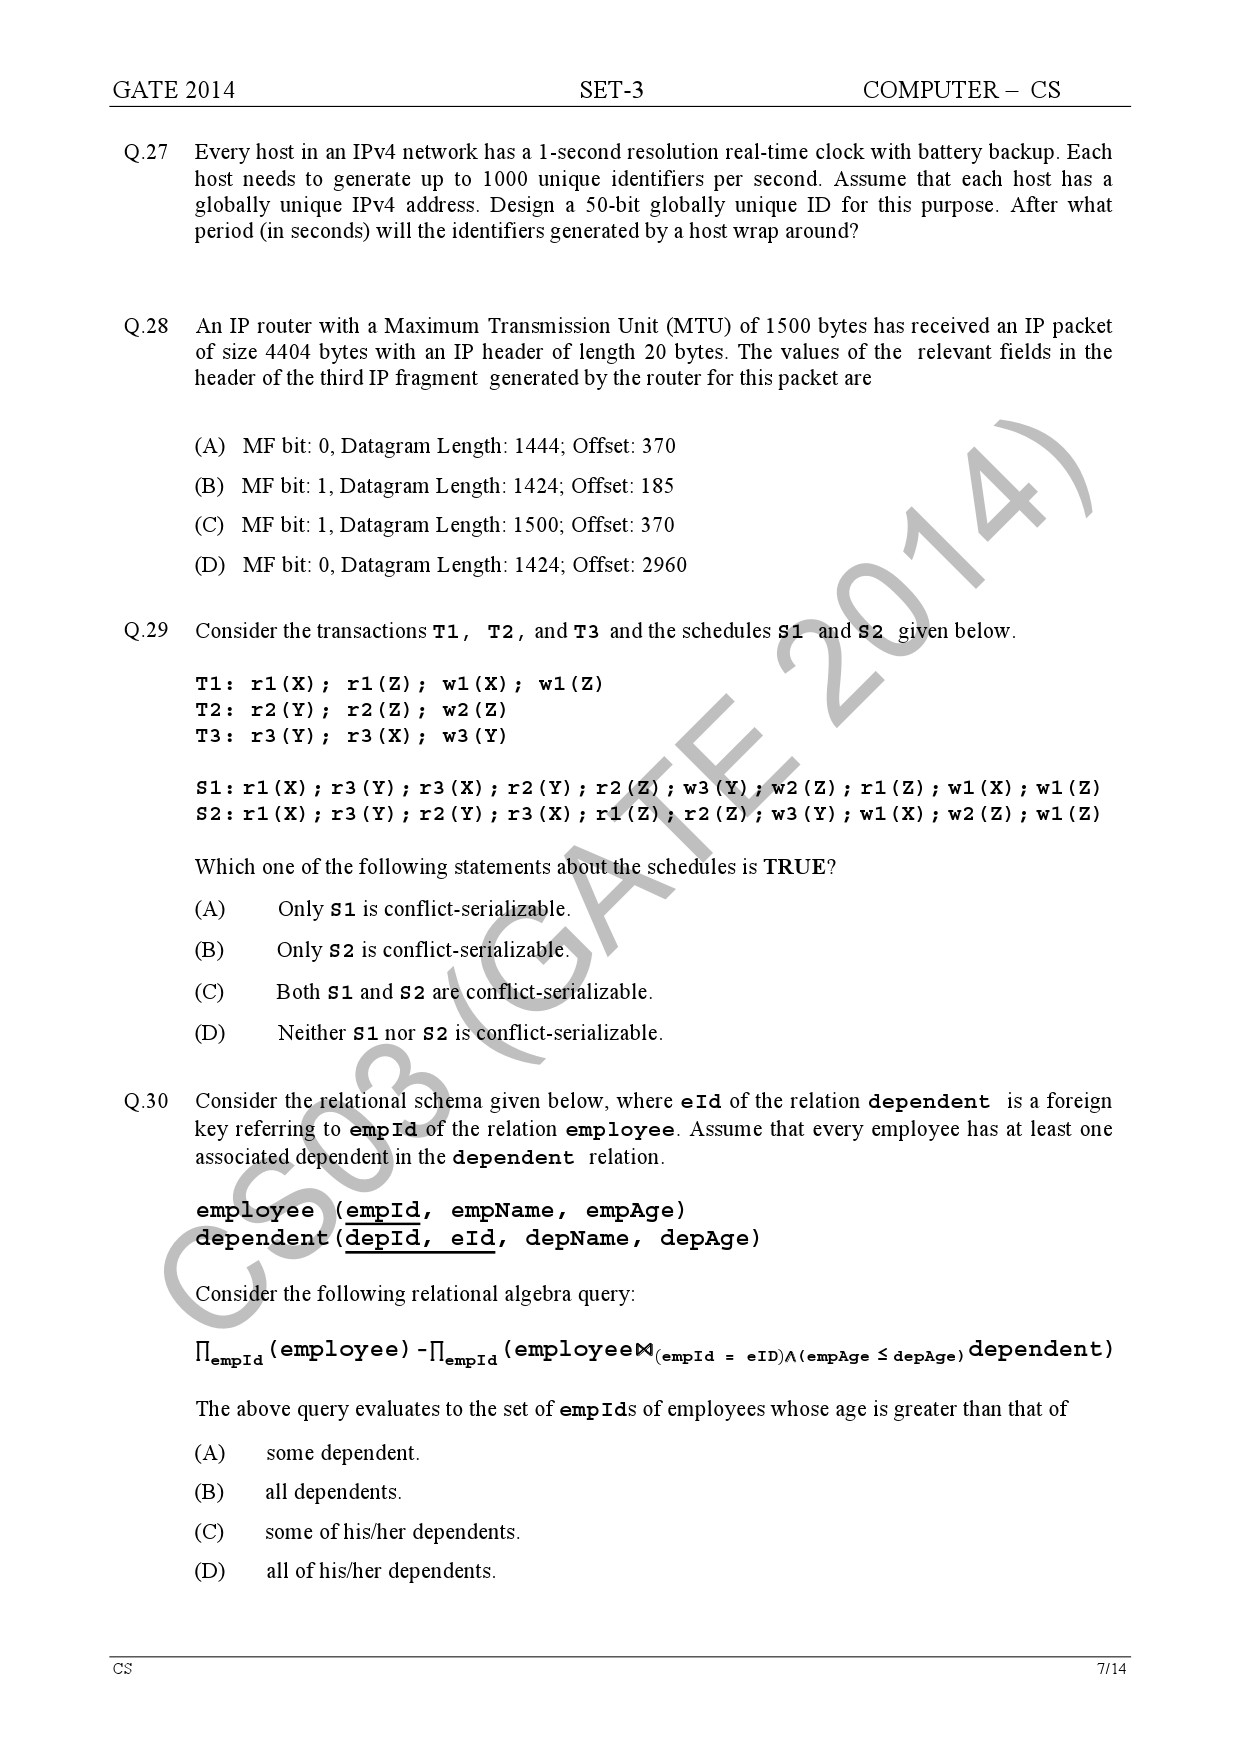 GATE Exam Question Paper 2014 Computer Science and Information Technology Set 3 13